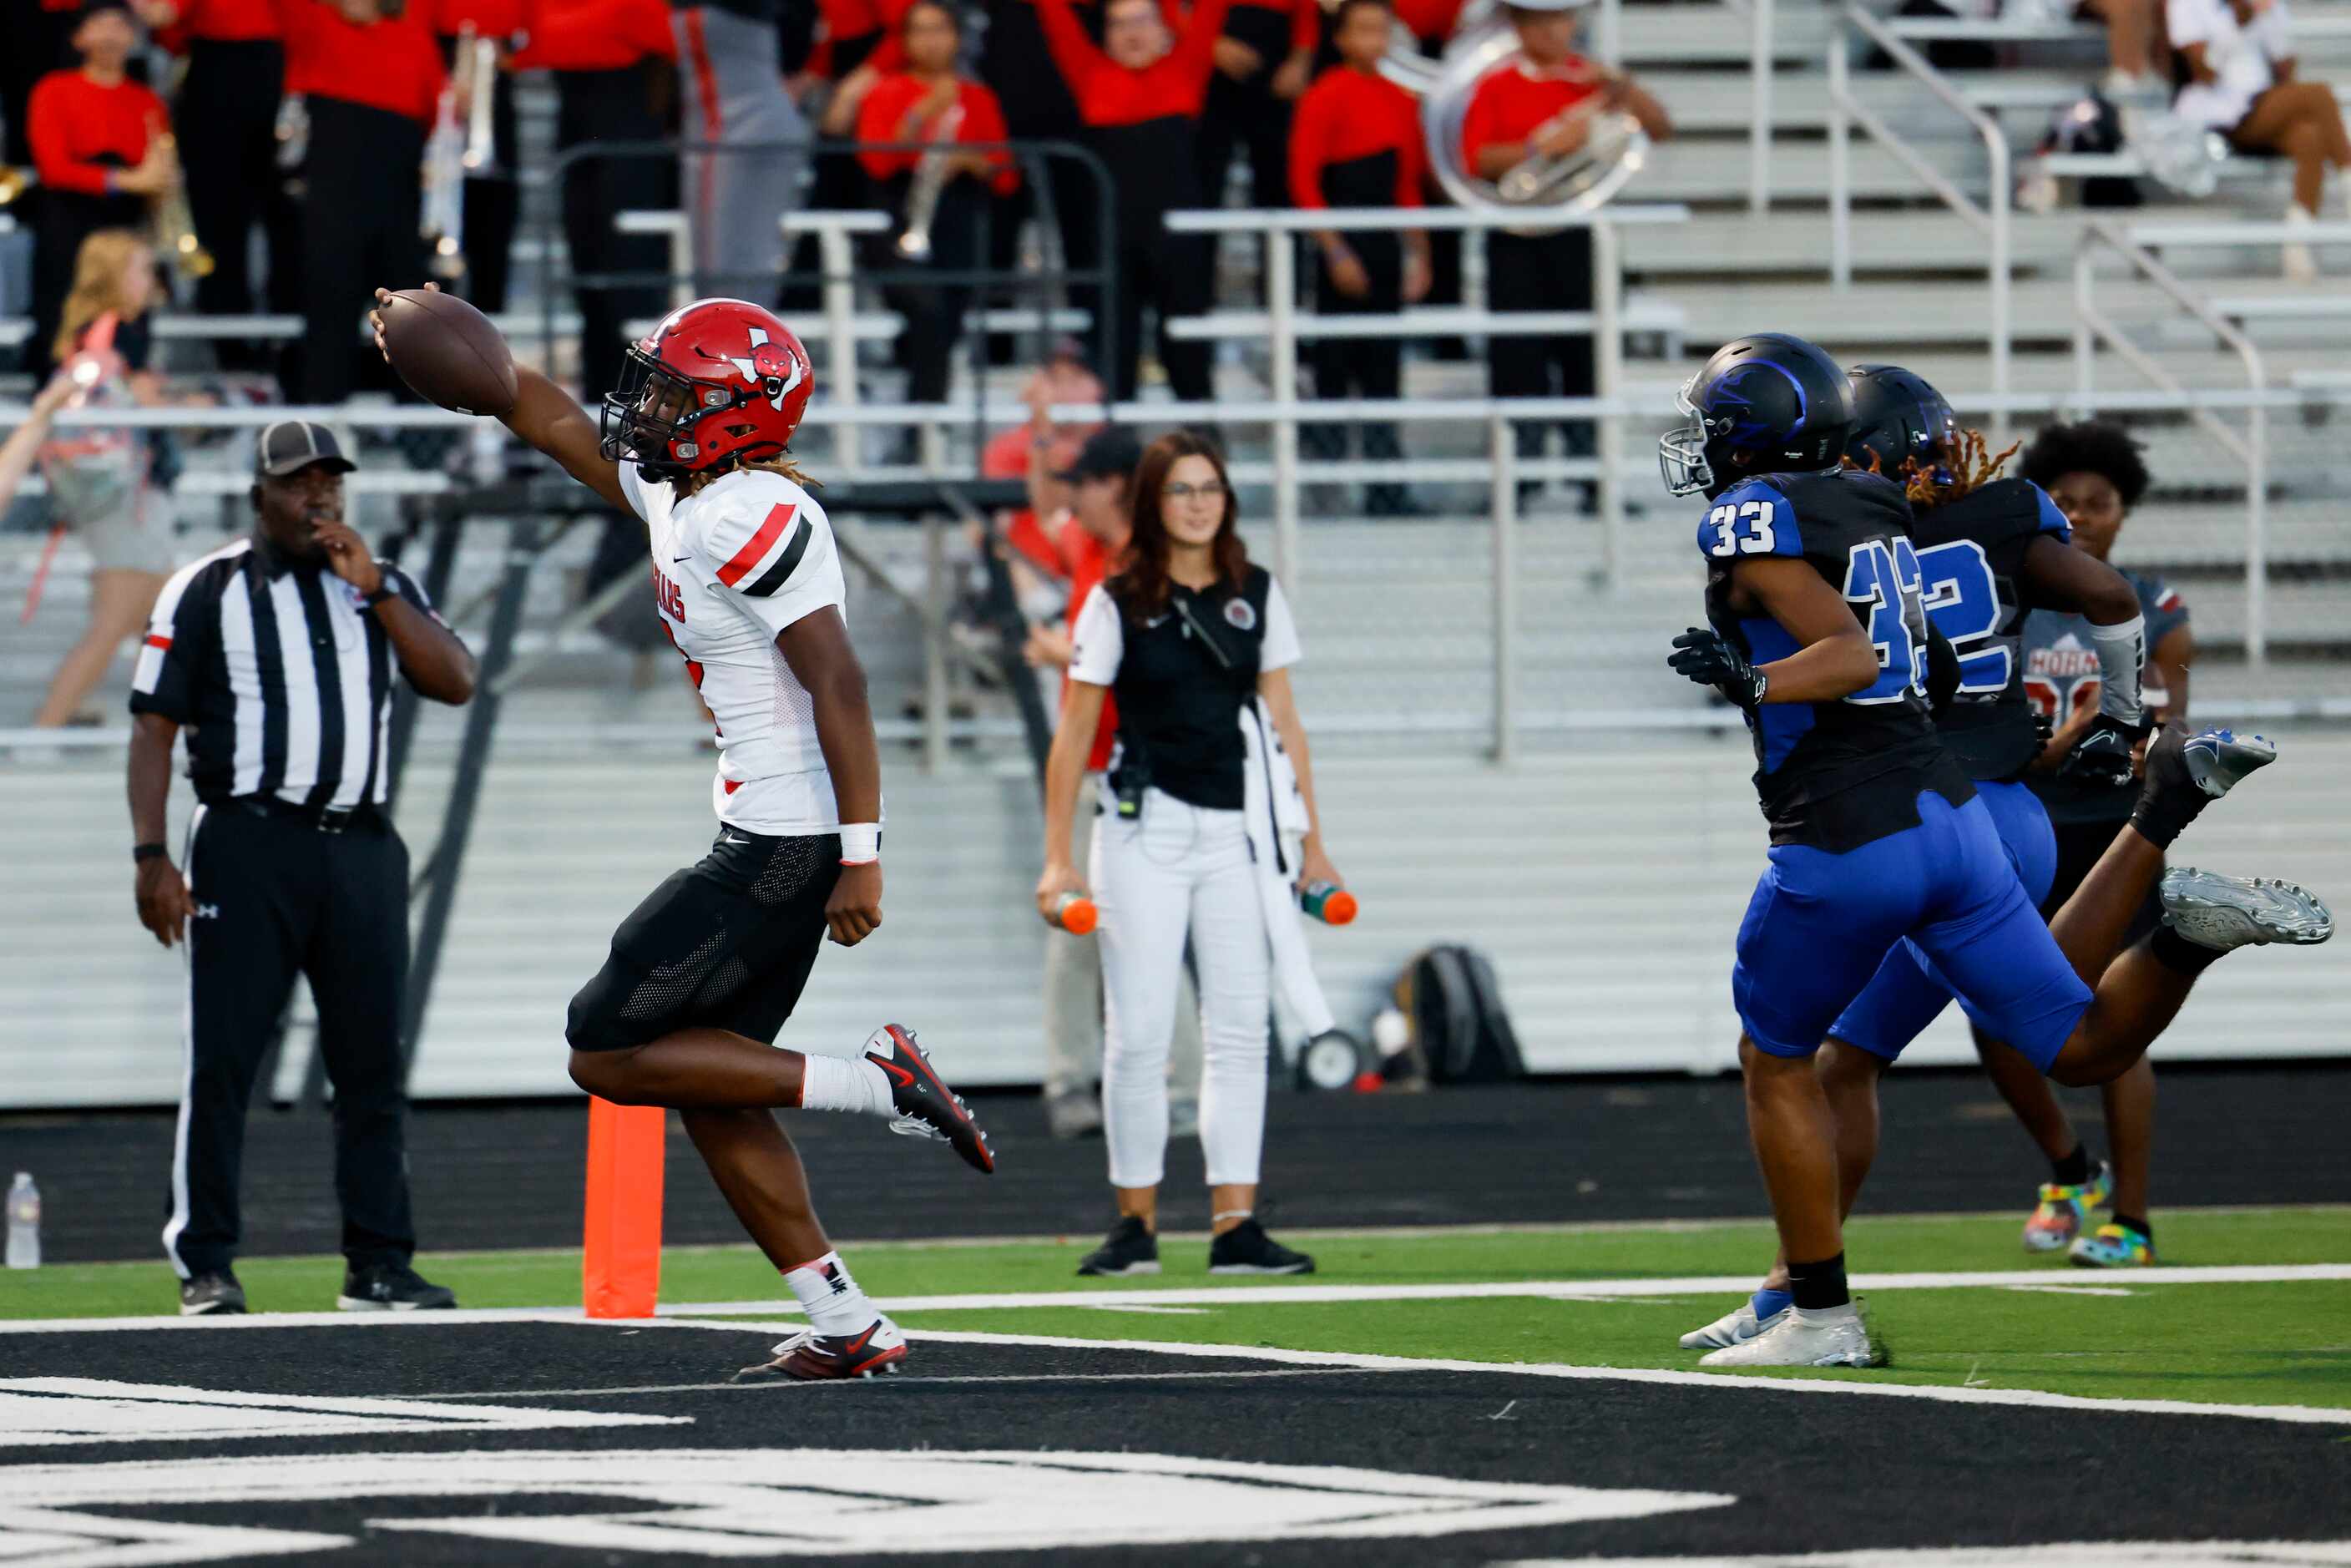 Mesquite Horn’s J.T. Thomas quarterback (2) outruns the North Forney defense for a touchdown...